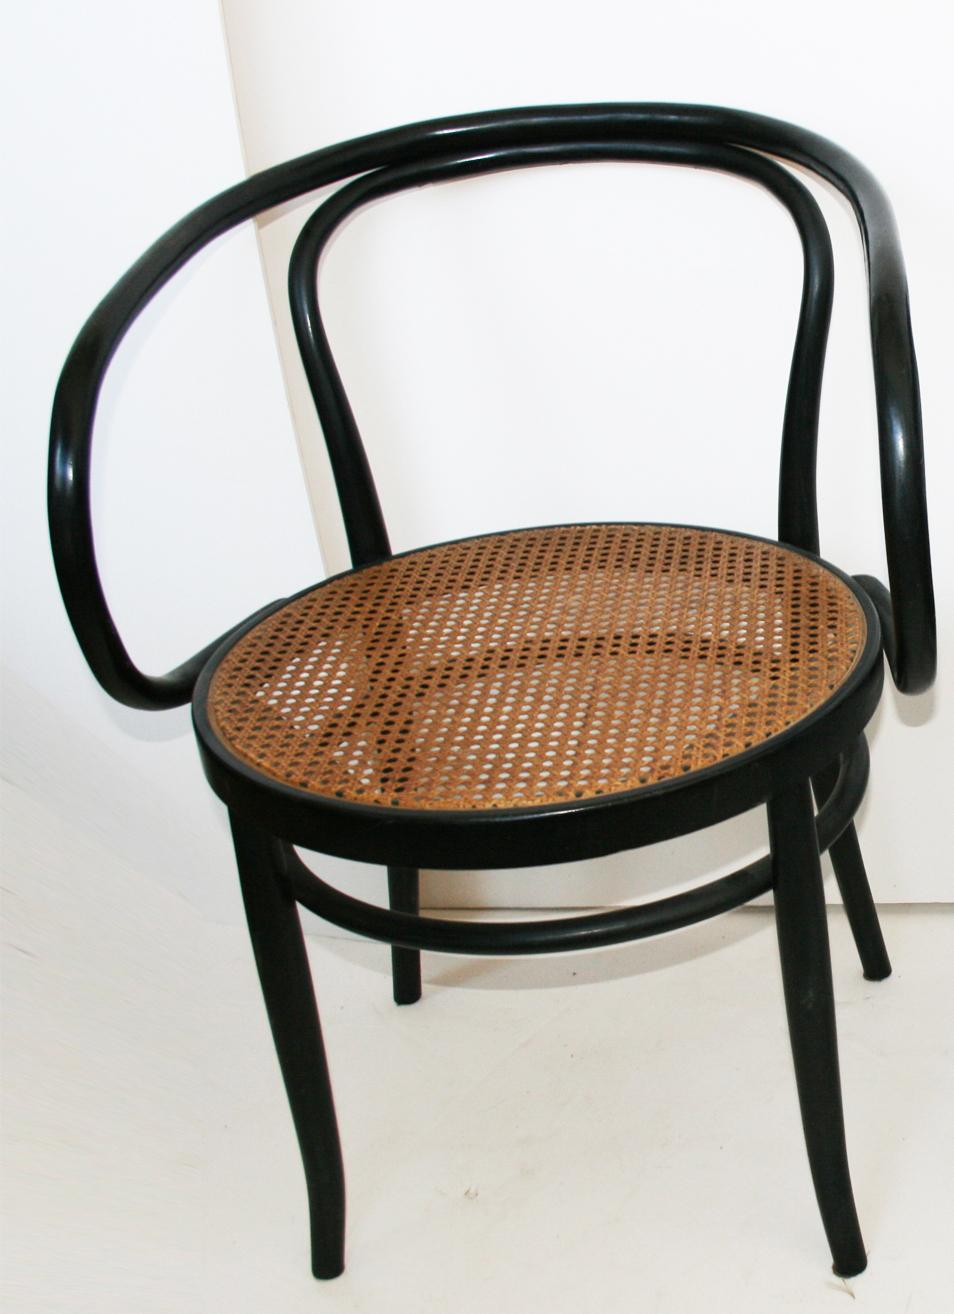 Midcentury Cane and Black Ebonized Bentwood Chair After Thonet 209 2